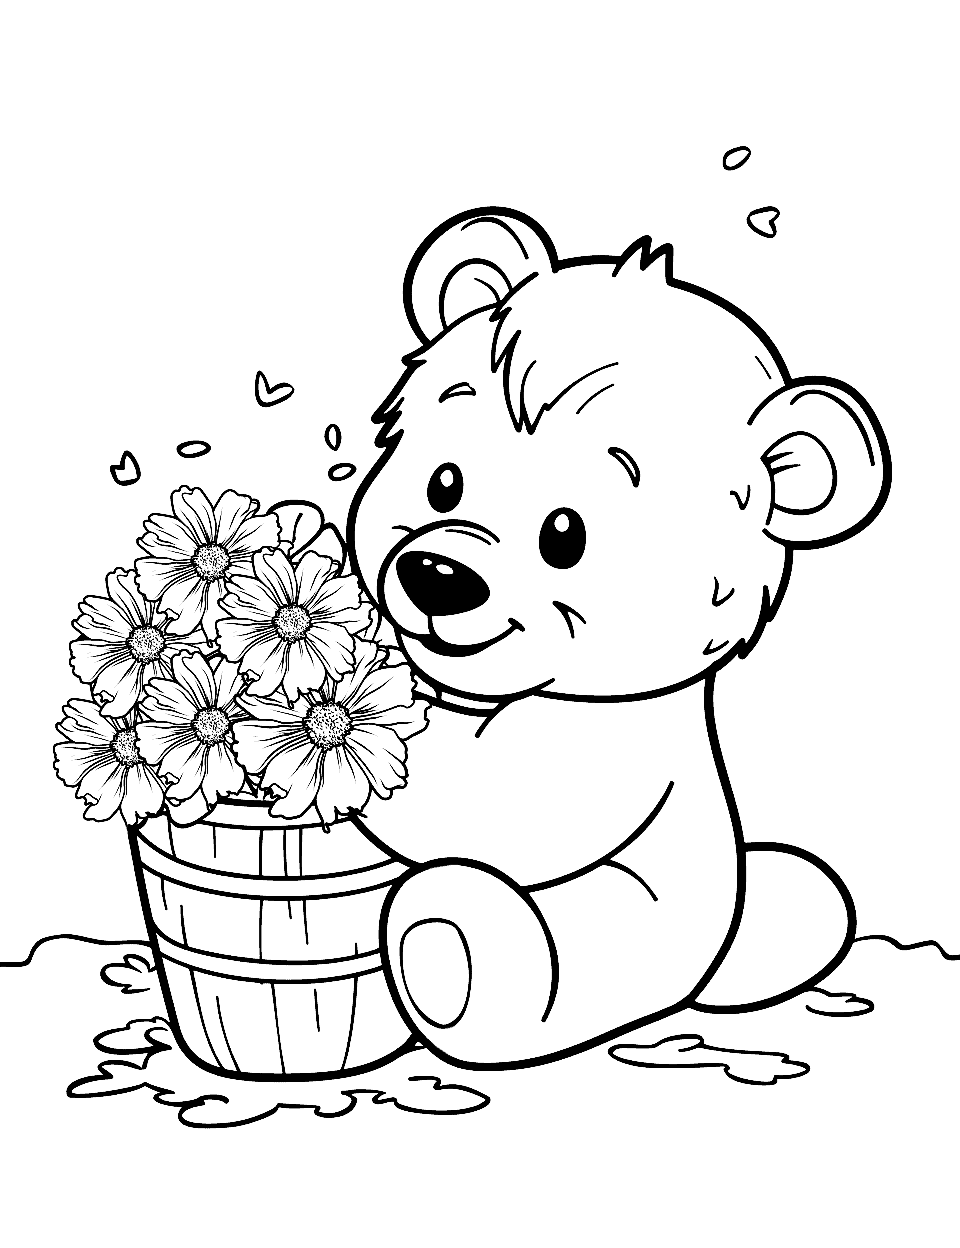 Gardening Teddy Bear Coloring Page - A teddy bear taking care of flowers.